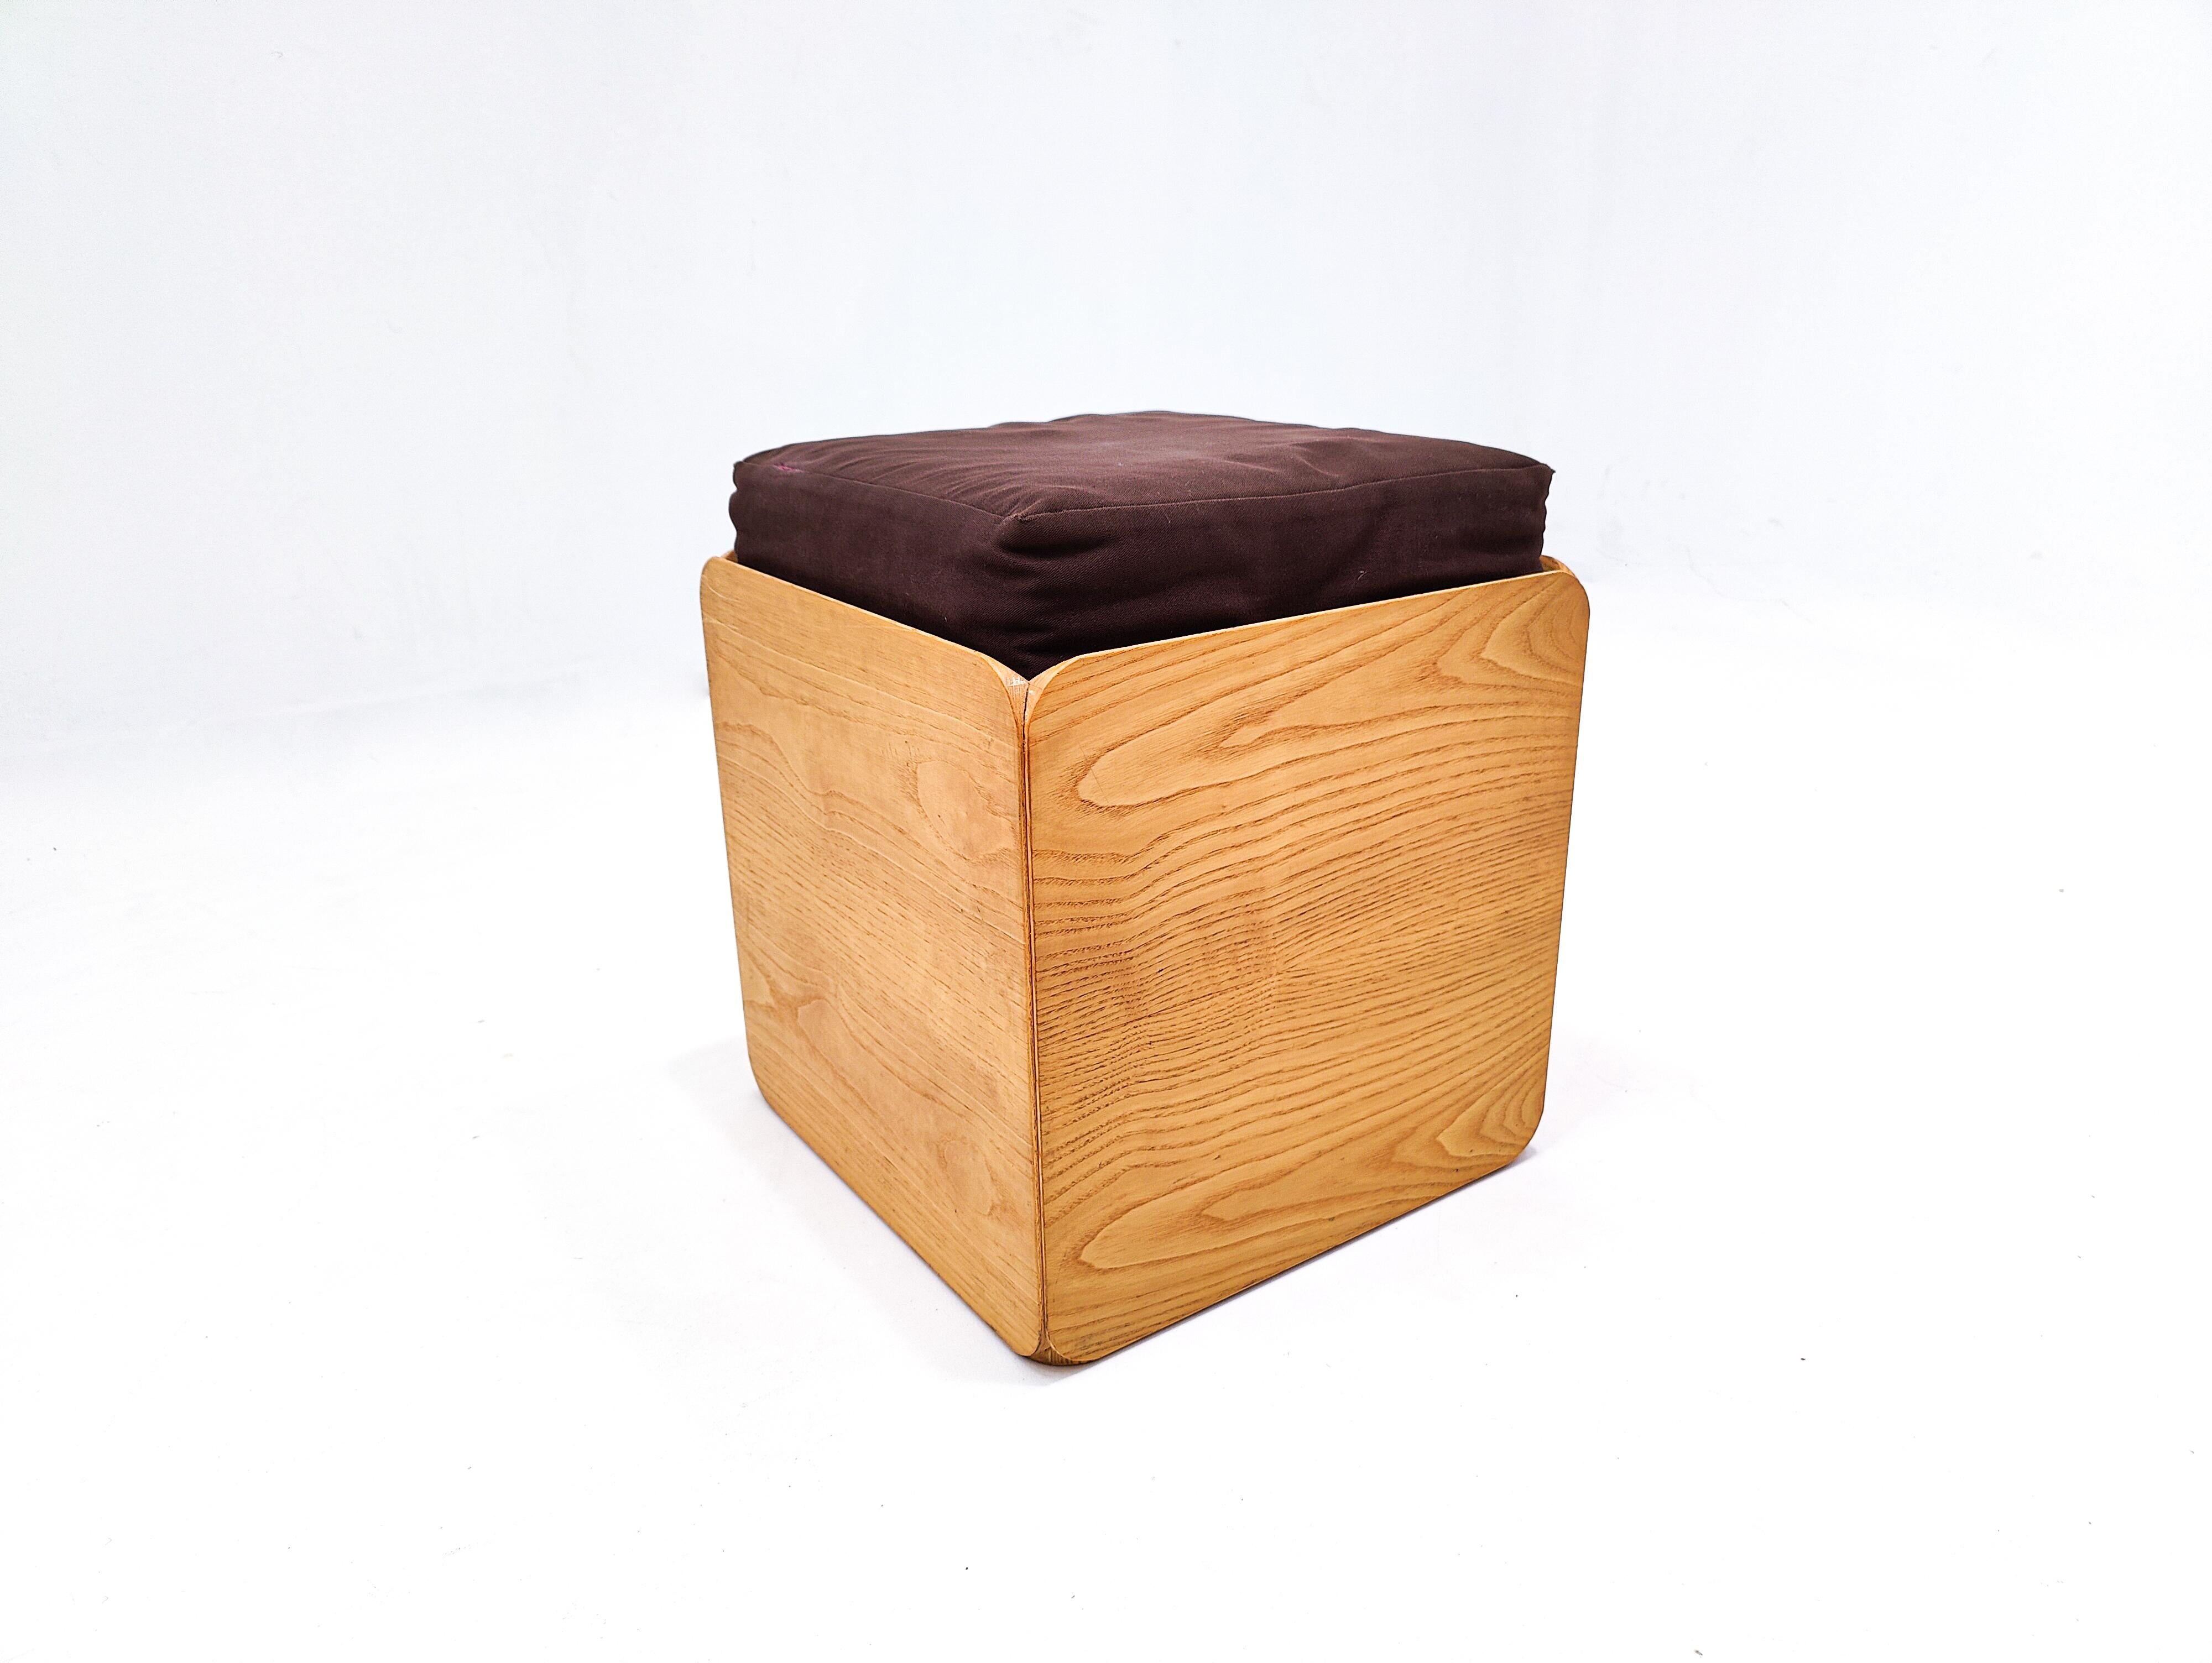 Mid-century storage stool by Derk Jan de Vries, 1960s - 5 available.